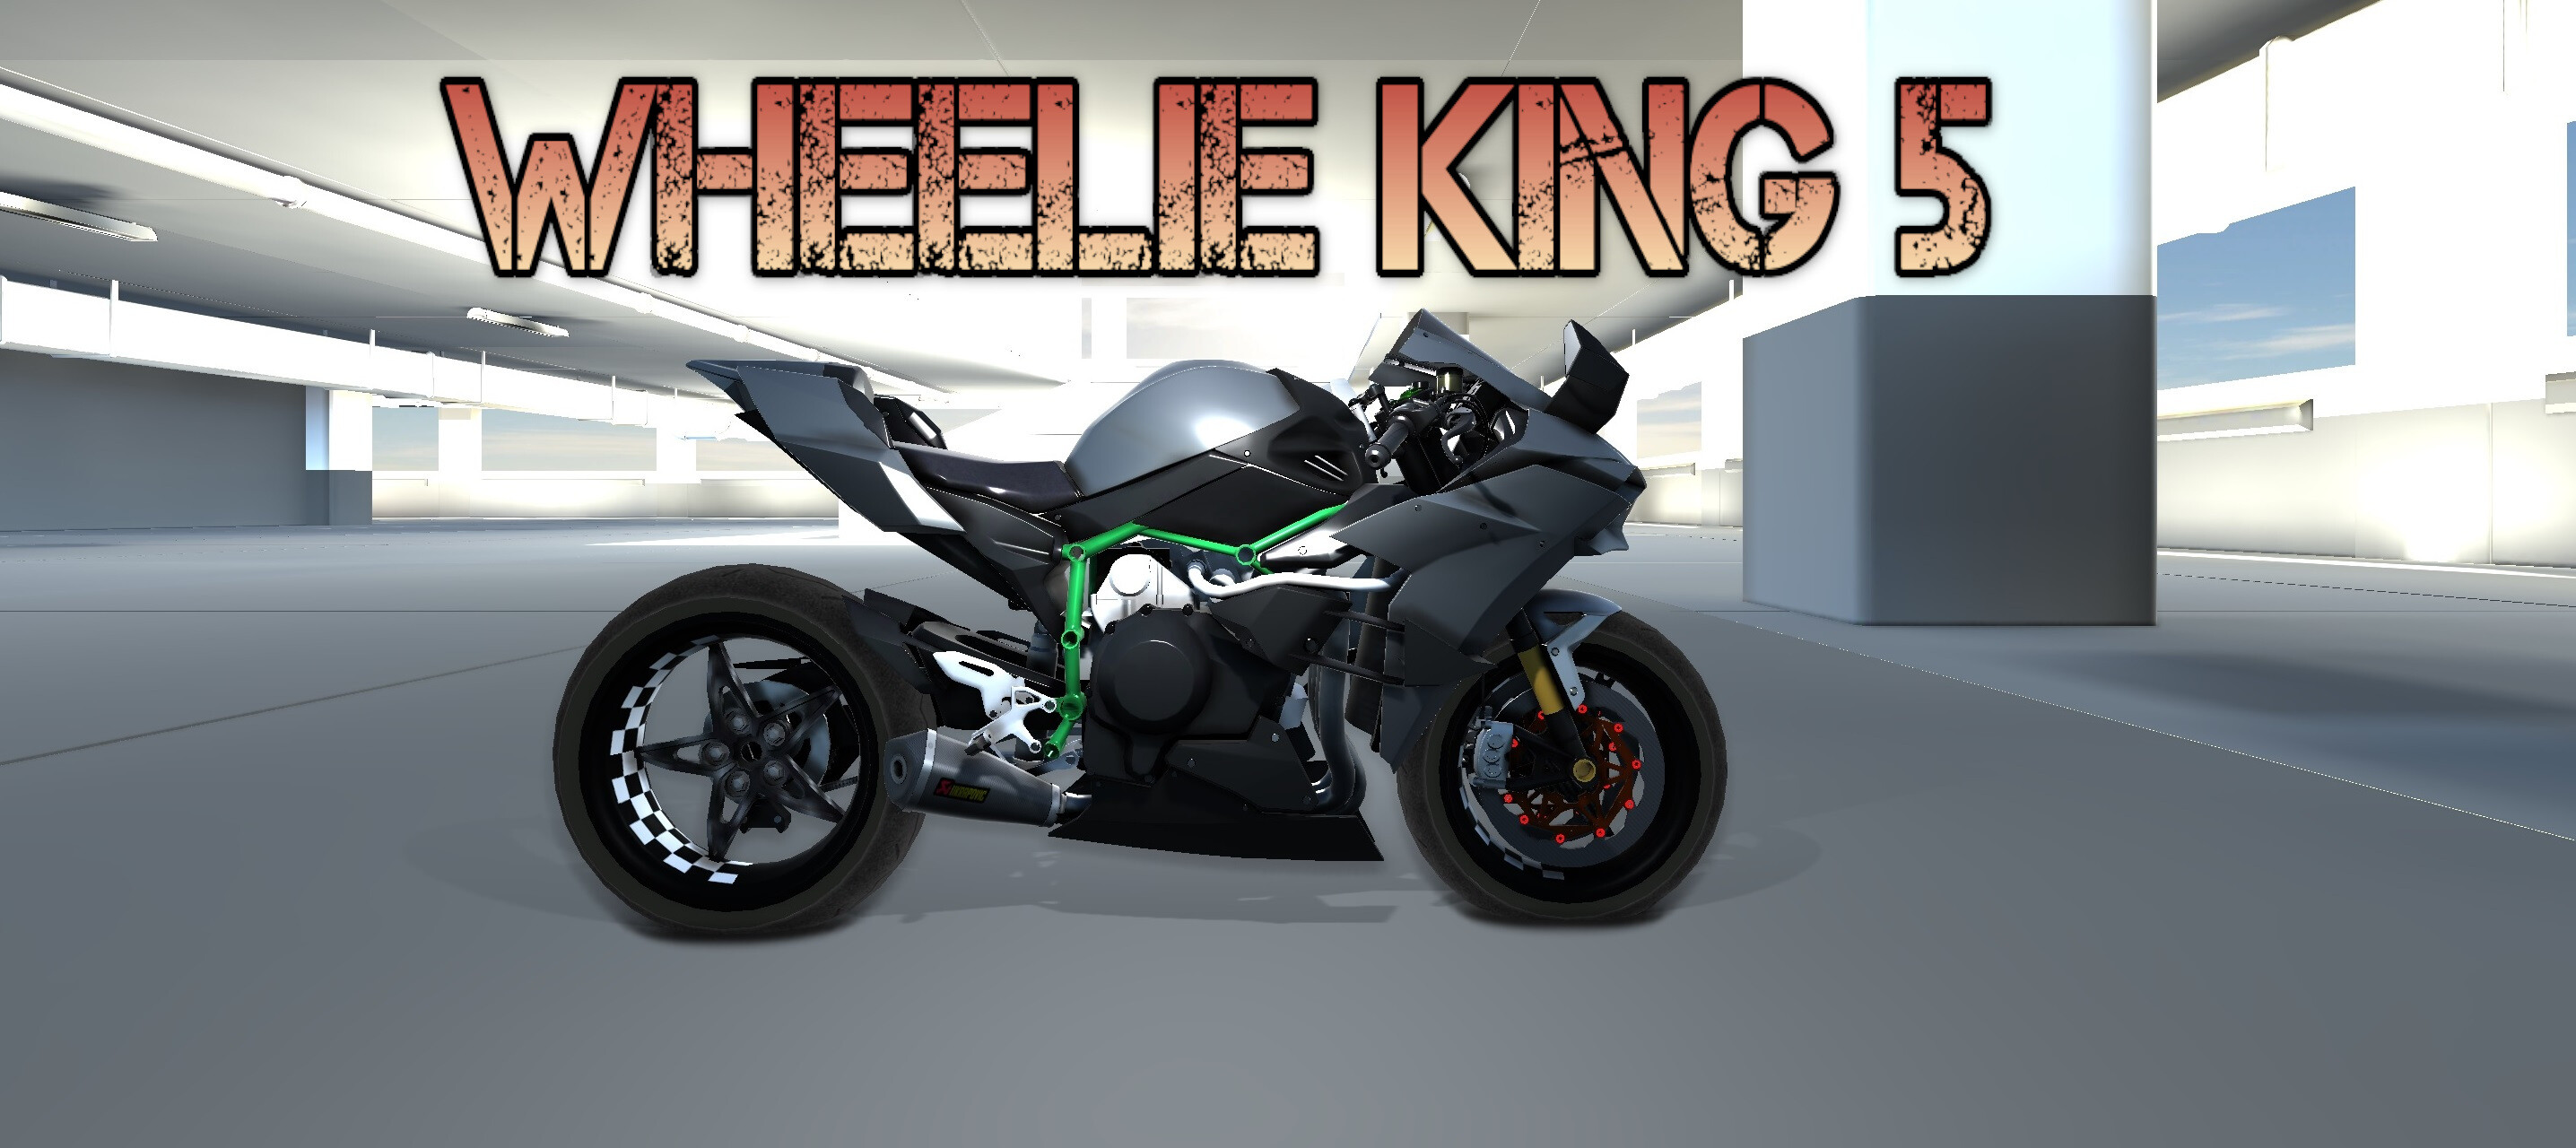 Wheelie King 5 Free Download for PC